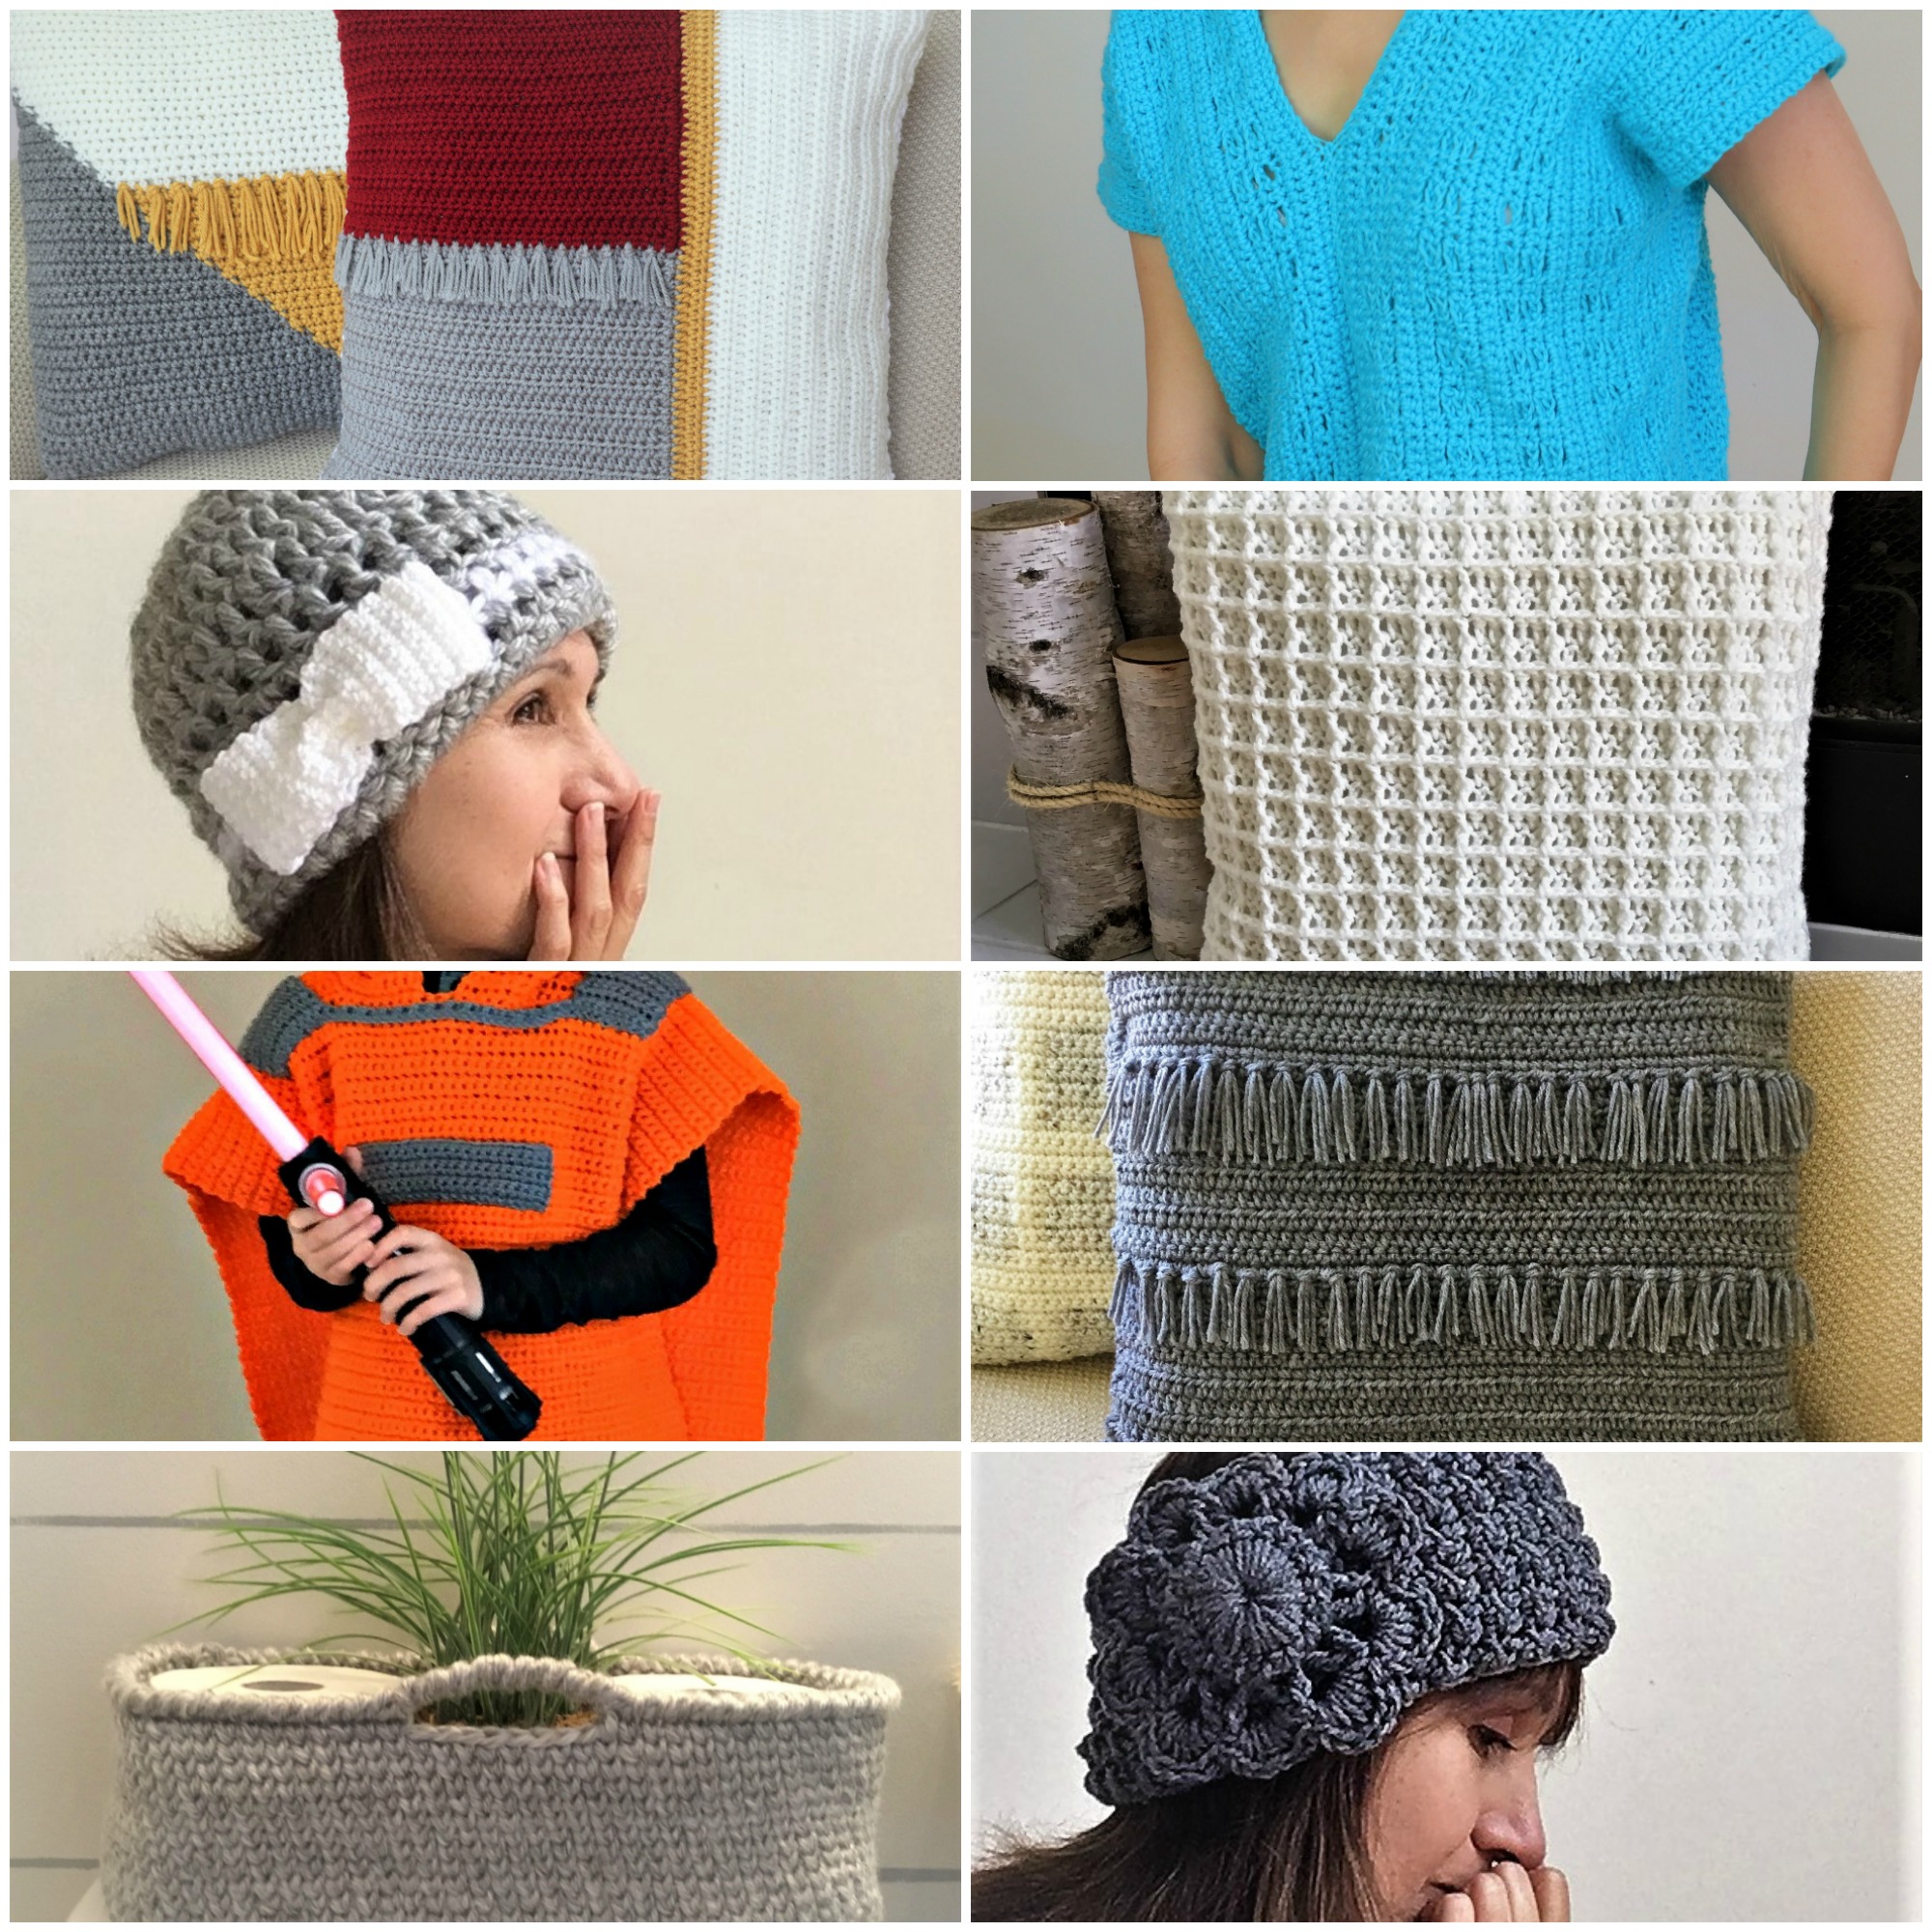 15 Chunky Yarn Crochet Patterns: Apparel, Home Decor + More - I Can Crochet  That